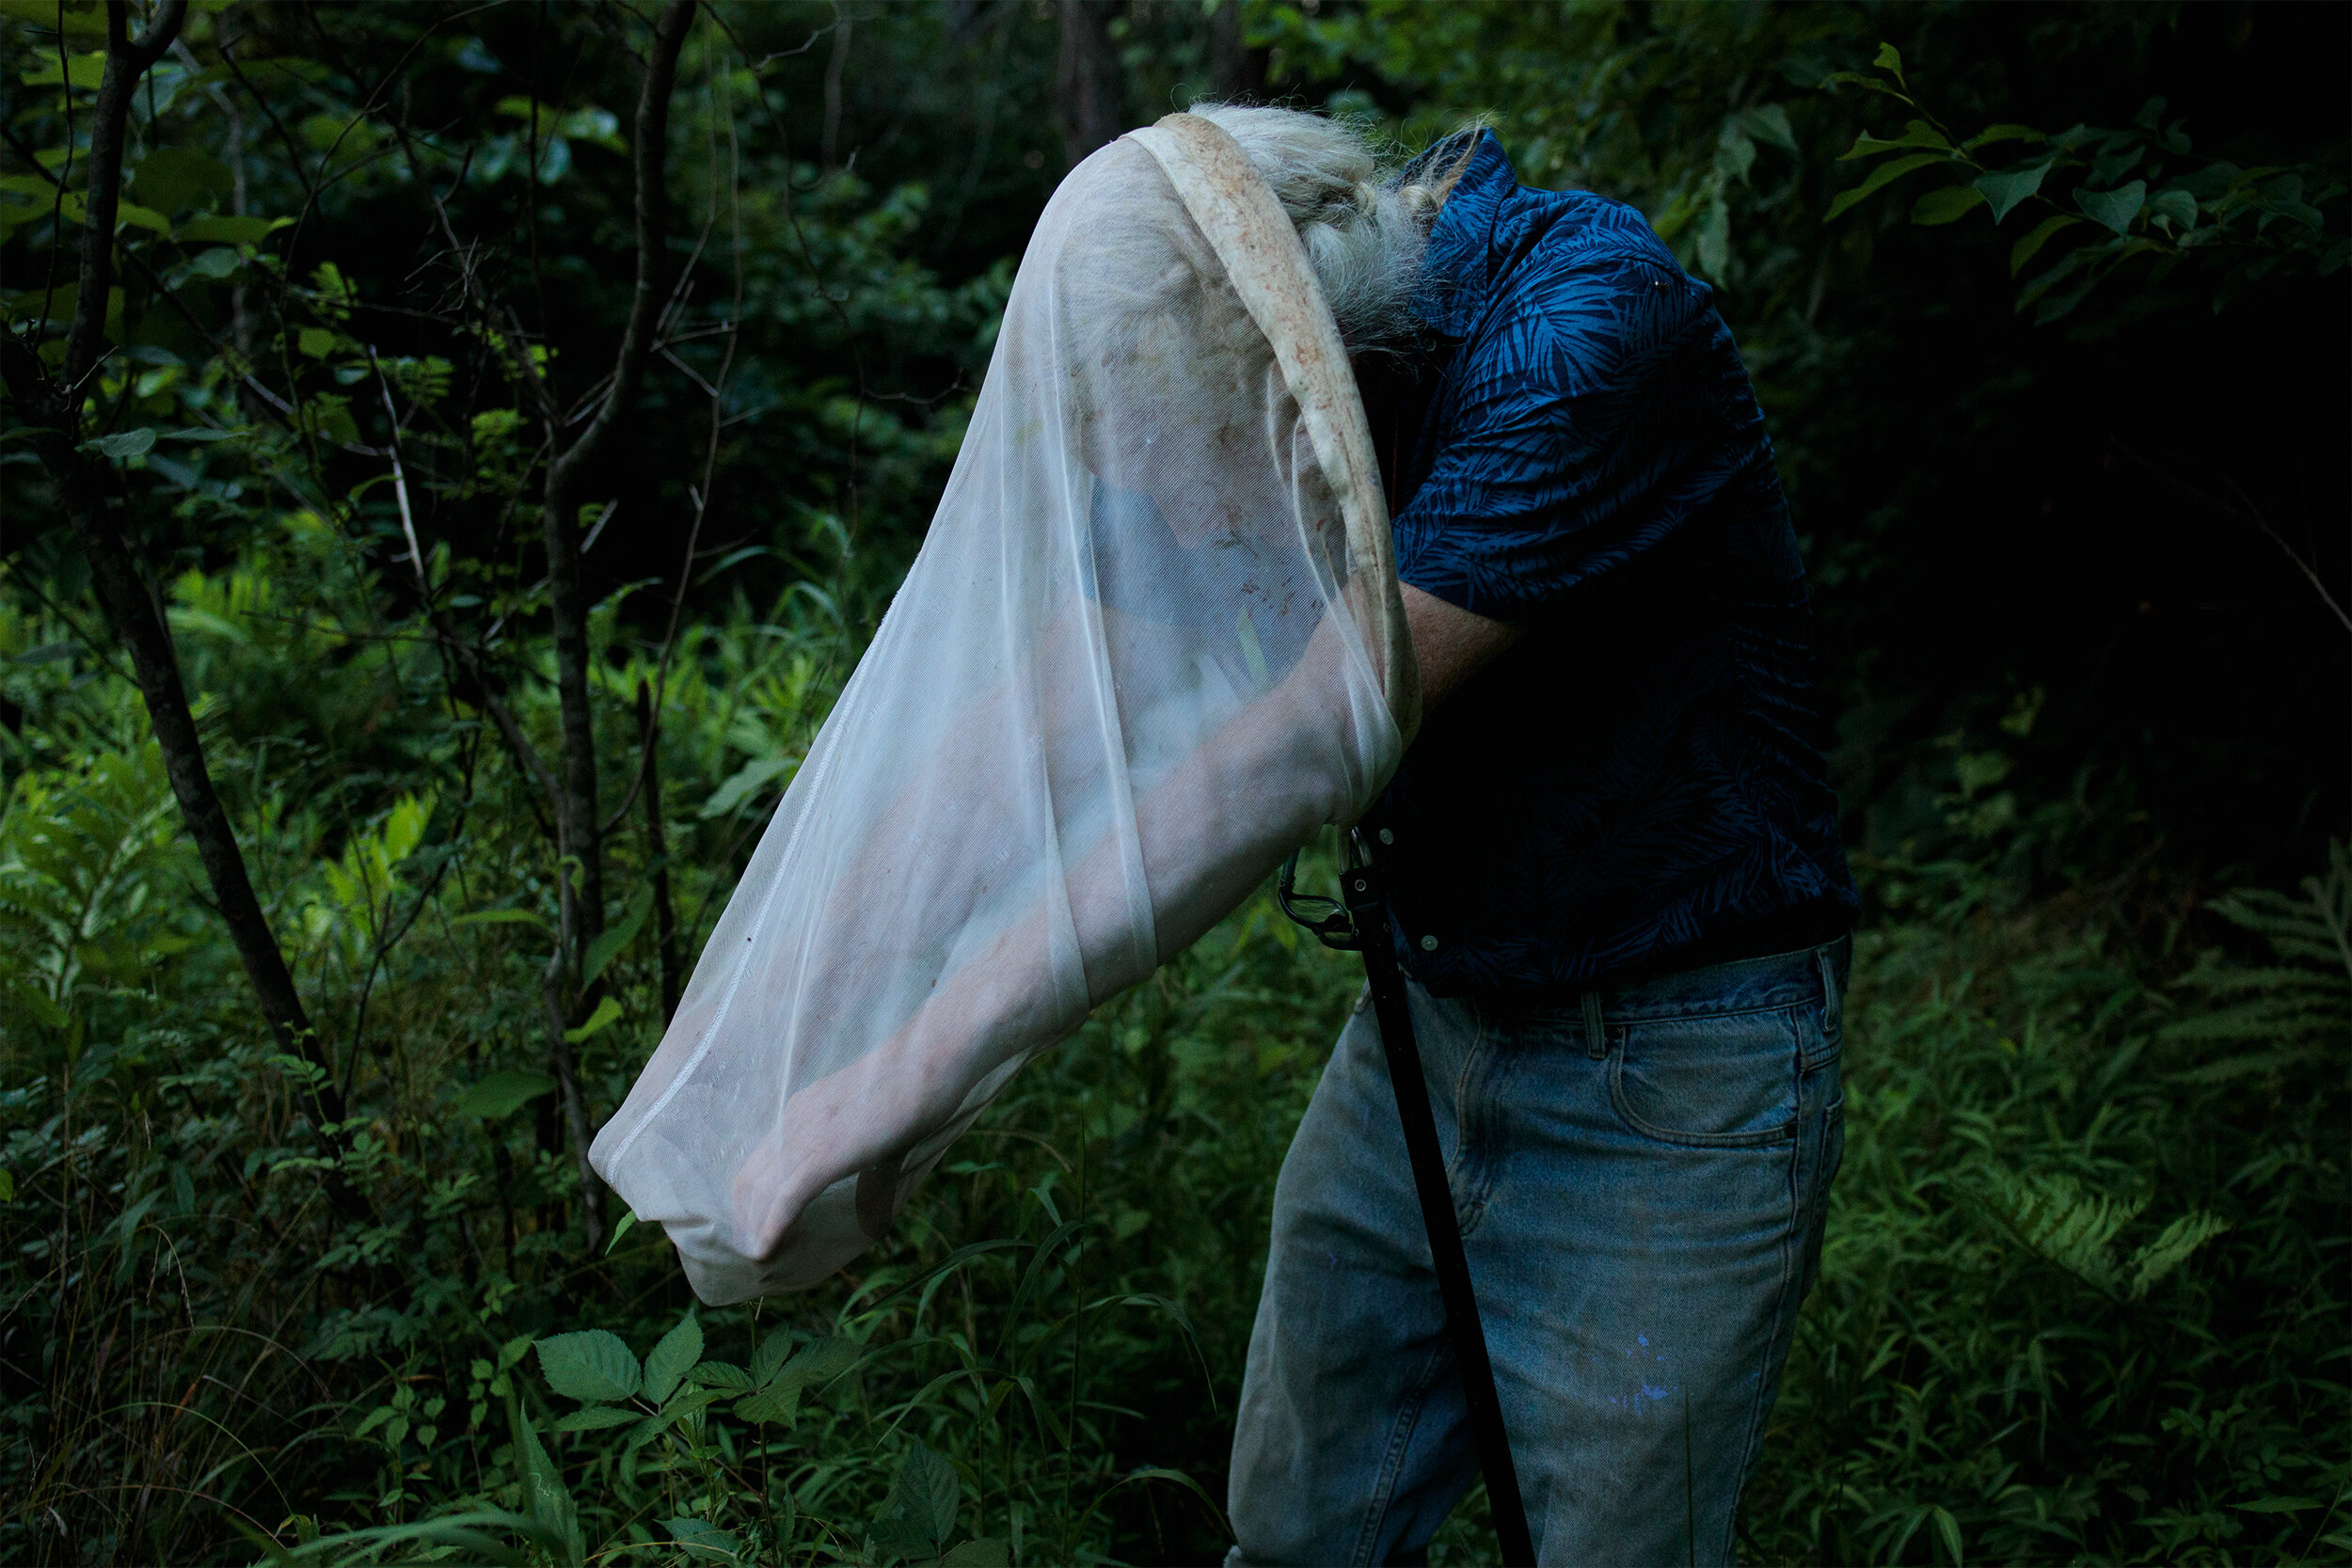  Sam Droege reaches into his bug net to pull out a firefly he captured on his property in Laurel, Md., on July 2, 2020. While it’s uncommon to see “unkempt” yards like his, they are incredible habitats for a variety of wildlife pushed out by developm